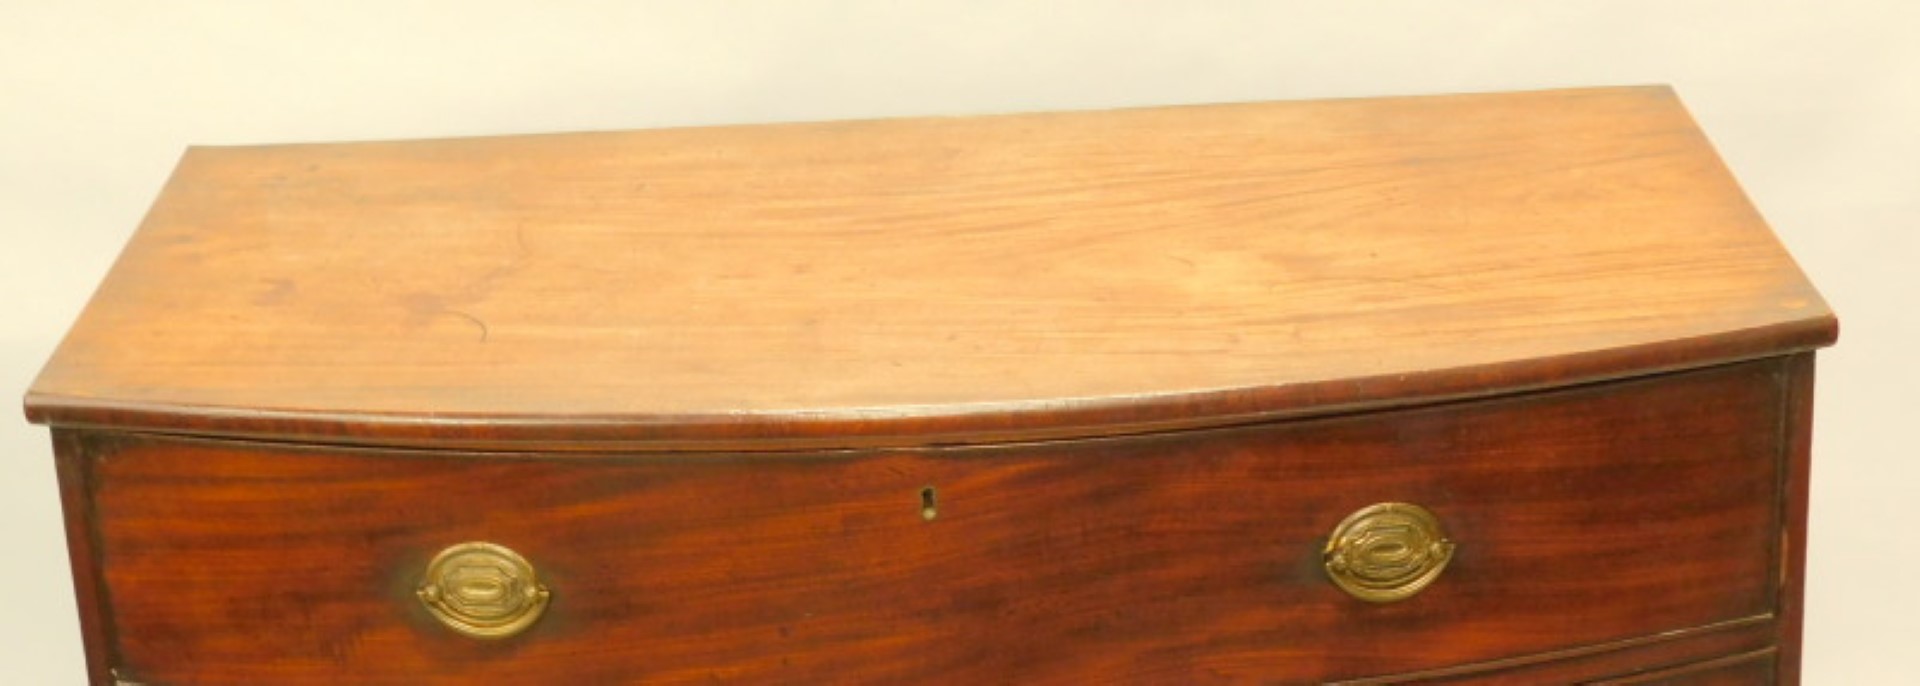 A George III mahogany bow fronted chest of drawers, with a plain top above three long drawers, - Image 3 of 5